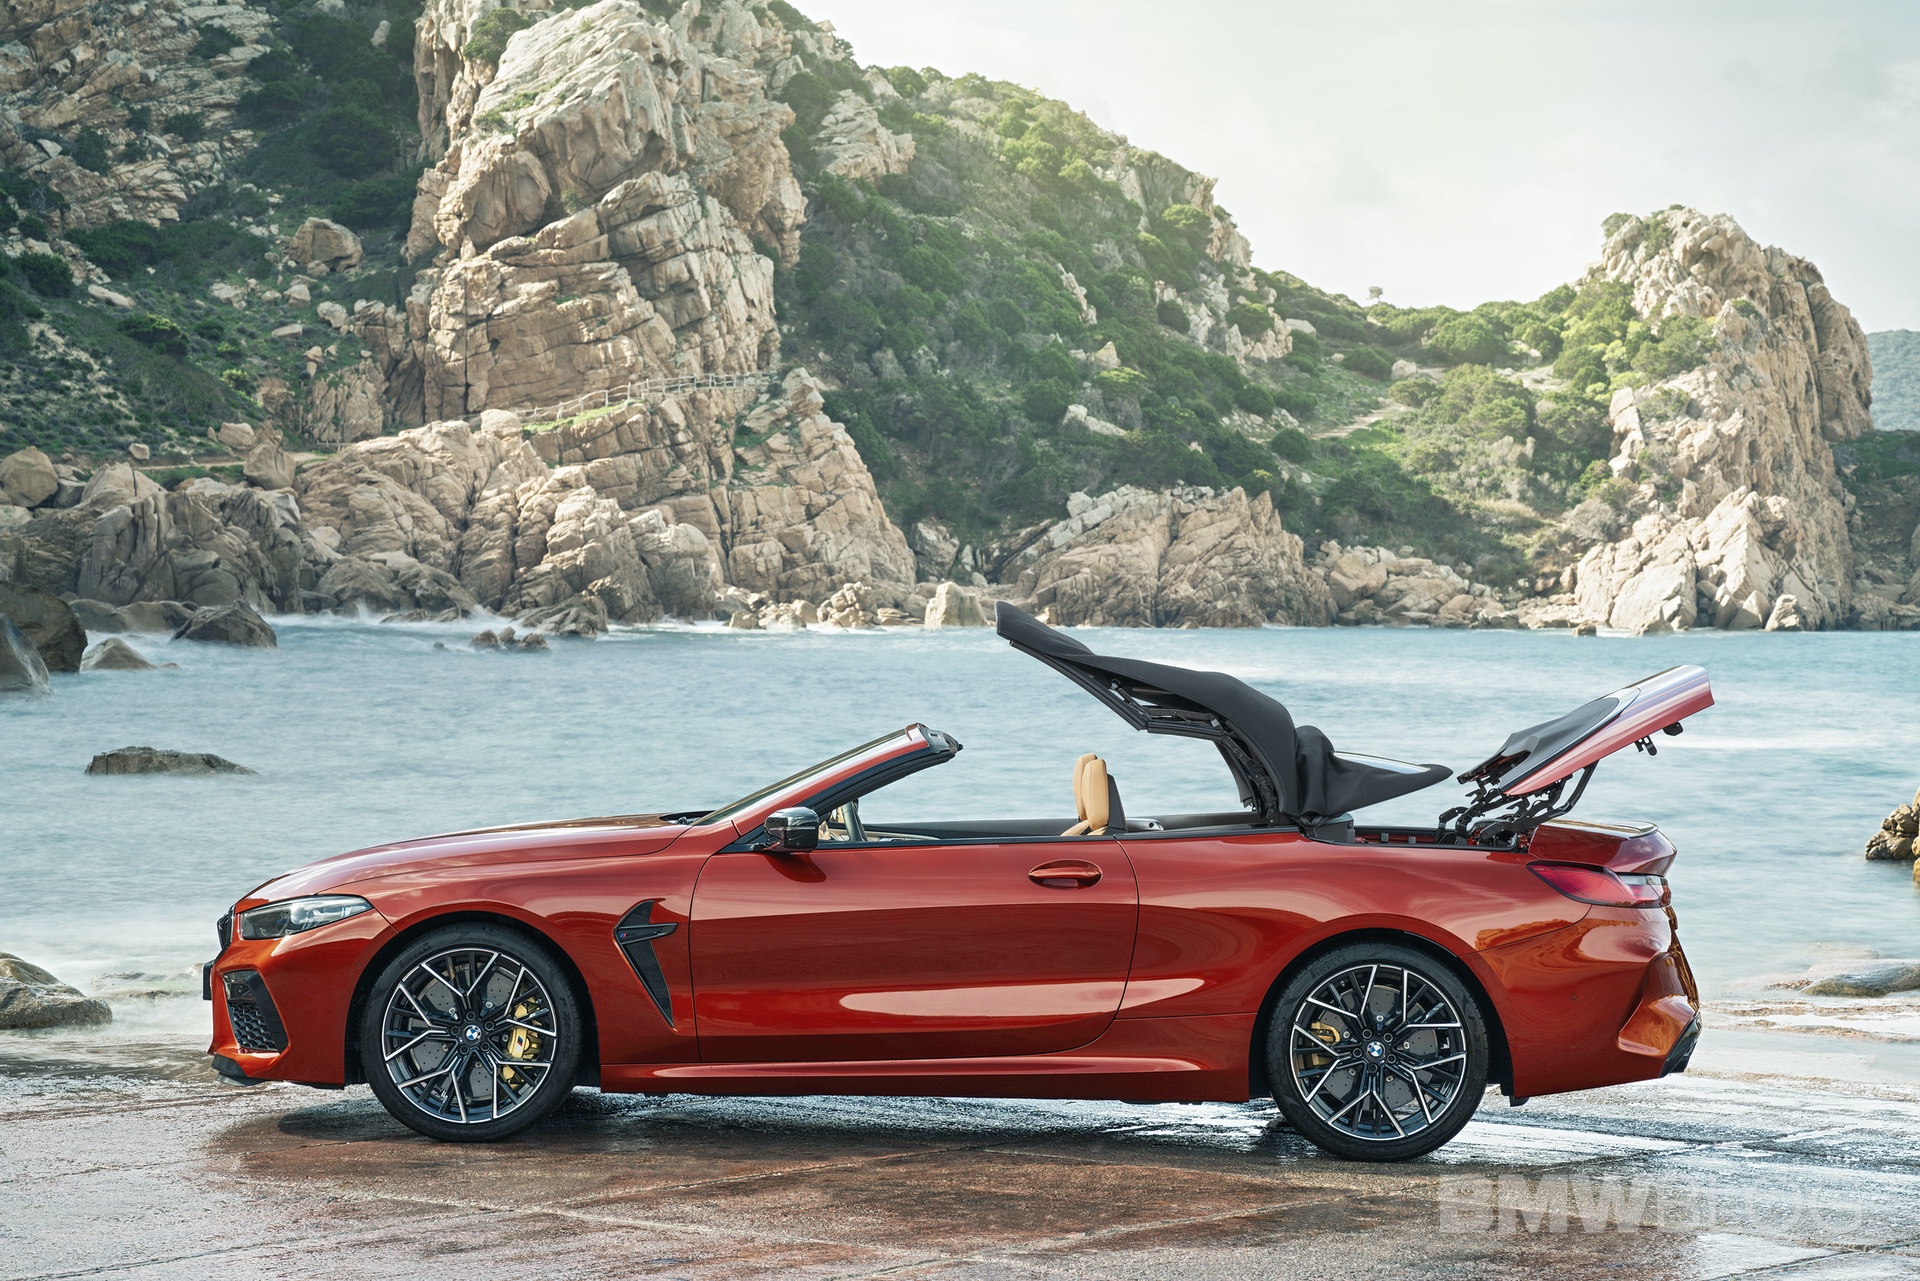 WORLD PREMIERE: The stunning and powerful BMW M8 Convertible